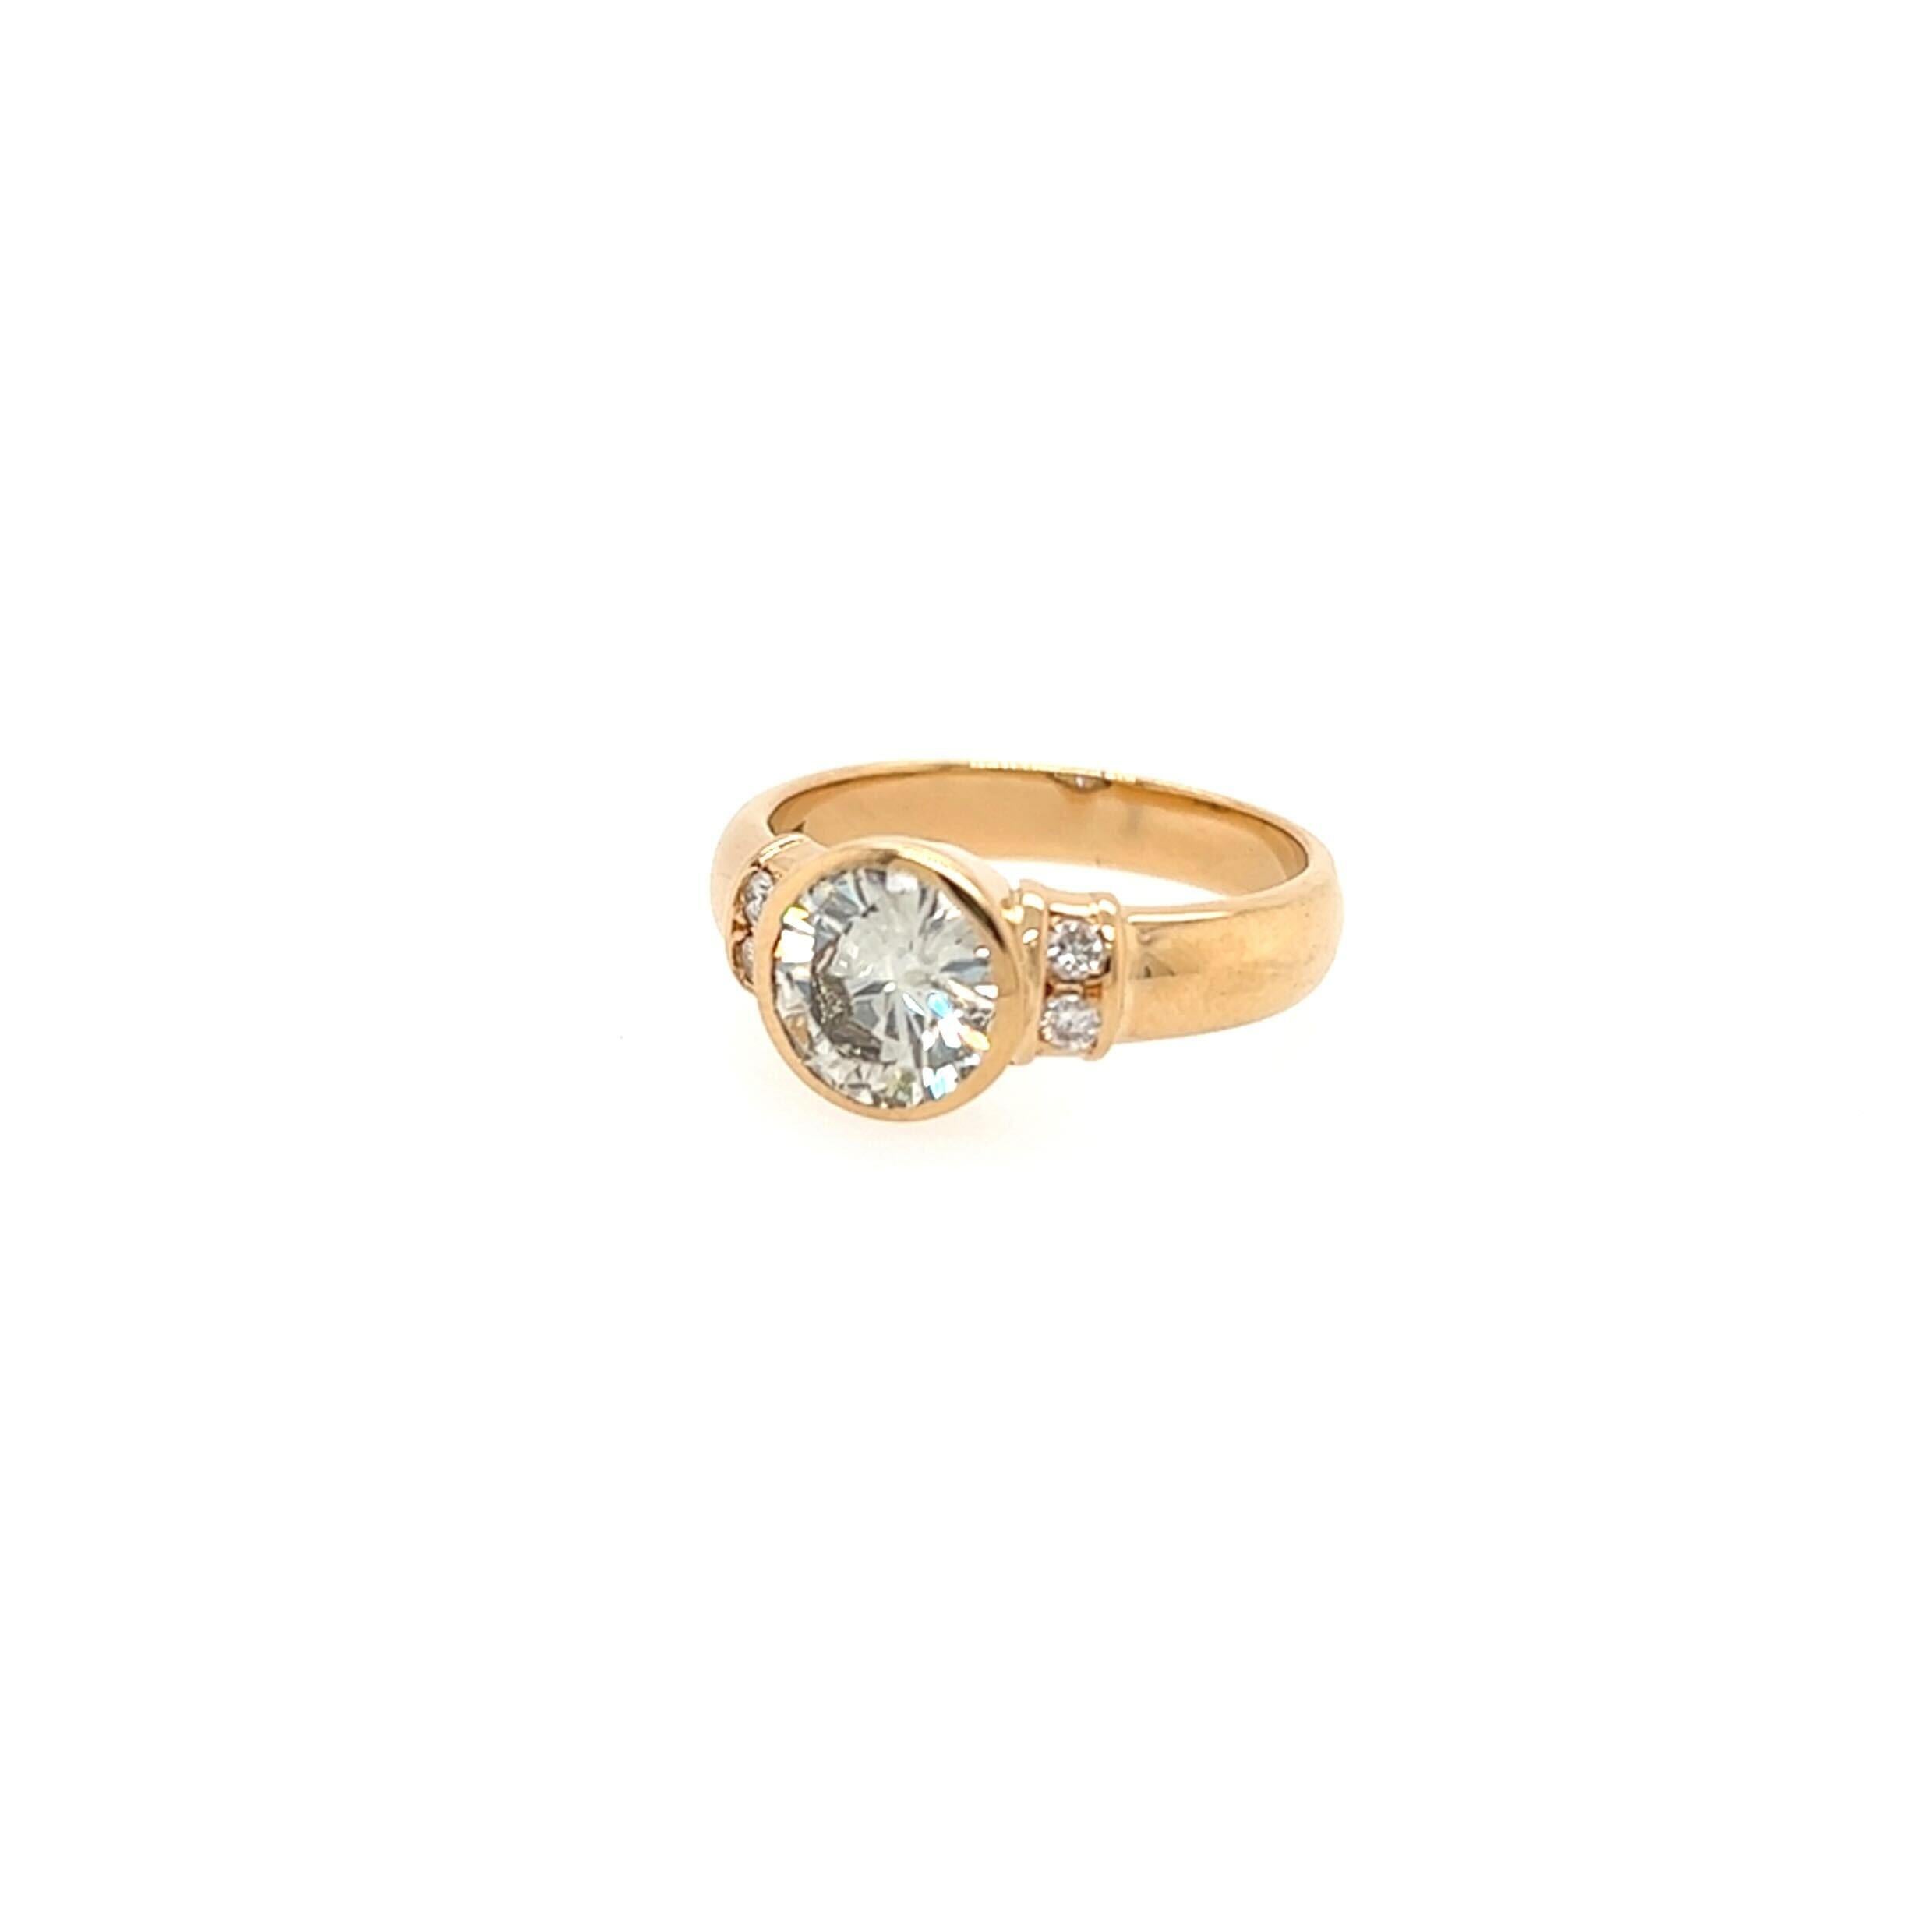 An 18 karat yellow gold and diamond ring.  Centering a bezel set brilliant cut diamond flanked by two (2) brilliant cut diamonds on each side.  Total diamond weight approximately 1.15 carats.  Color:  L-M.  Clarity: SI2.  Size approximately 4 1/4. 